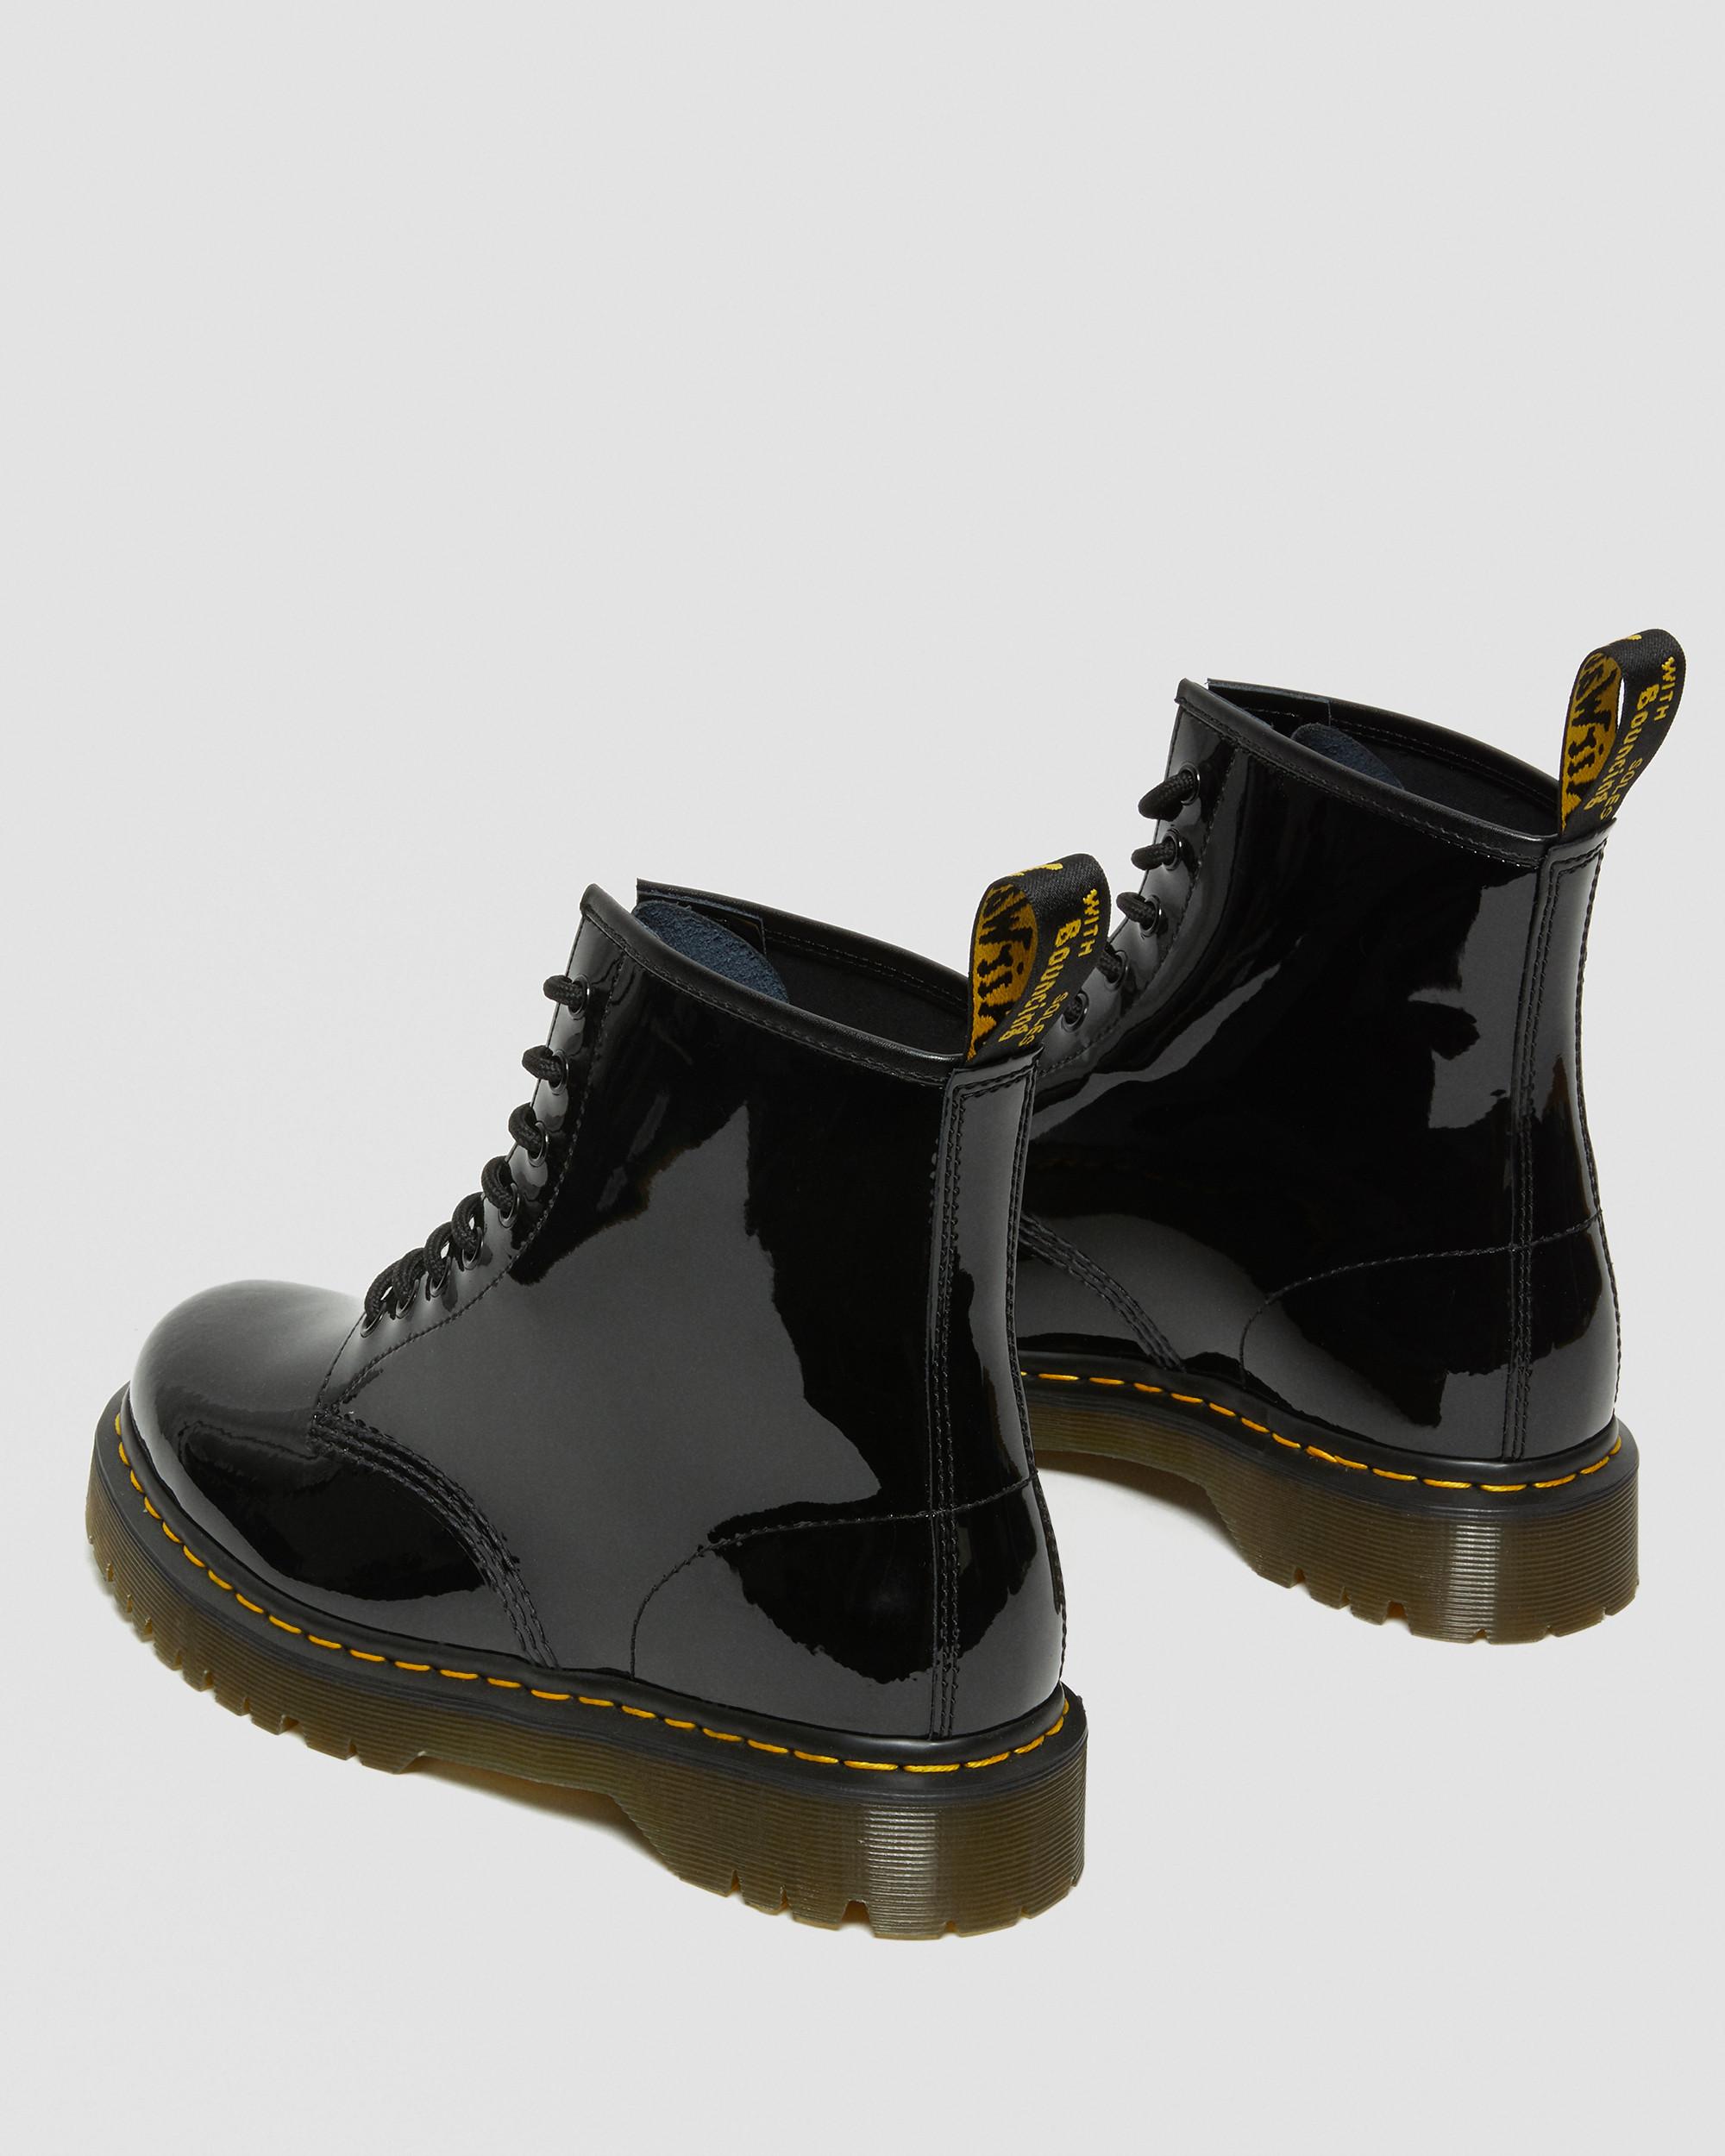 DR MARTENS 1460 Bex Patent Leather Lace Up Boots